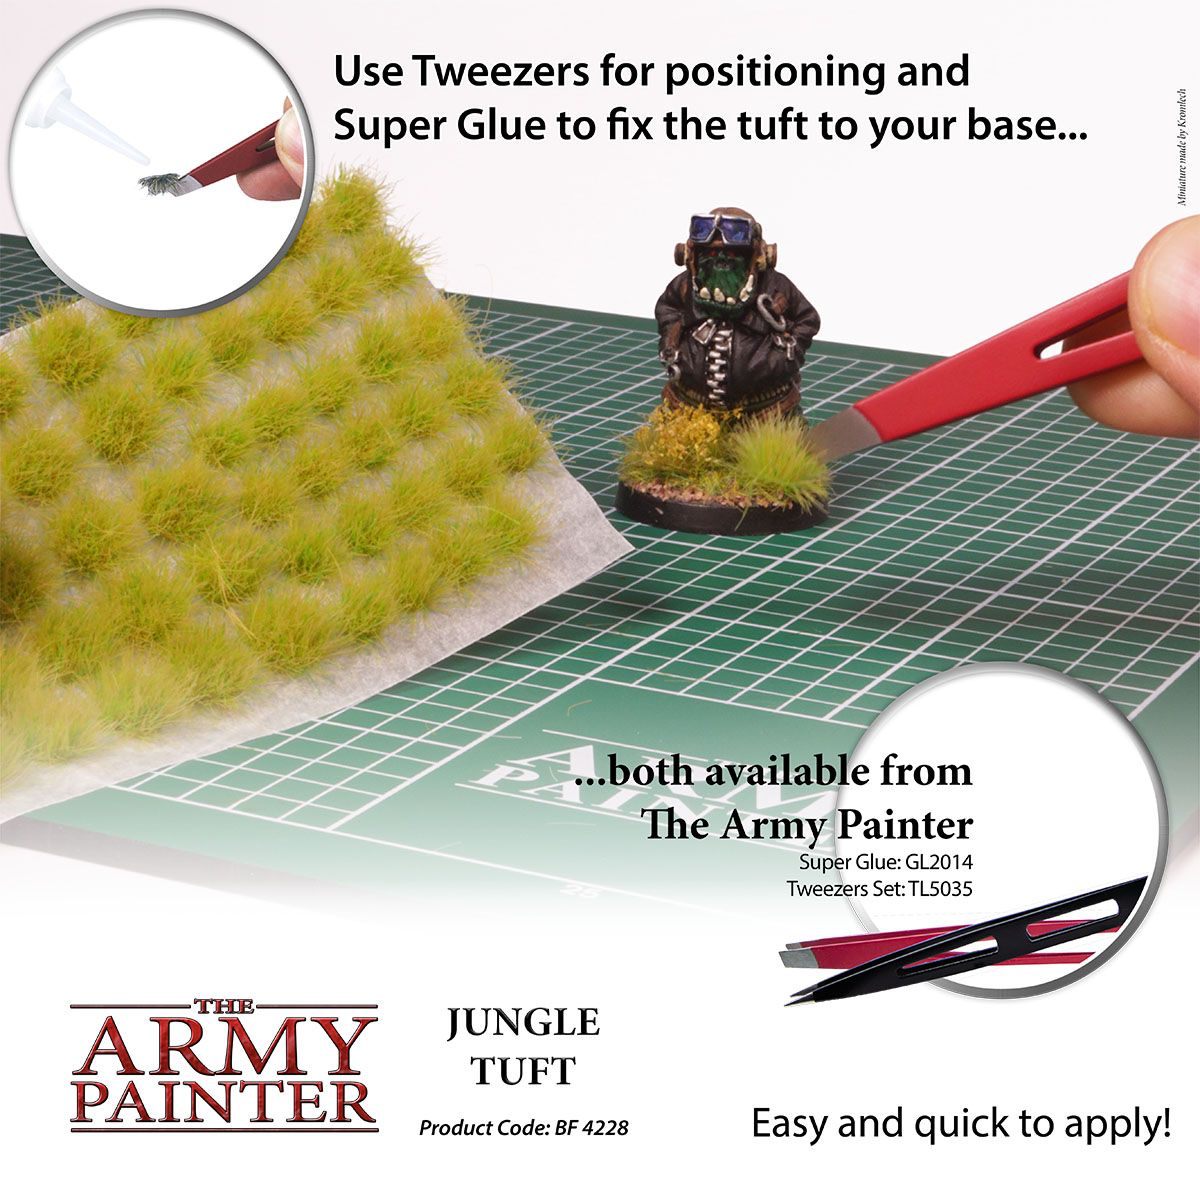 The Army Painter - Jungle Tufts